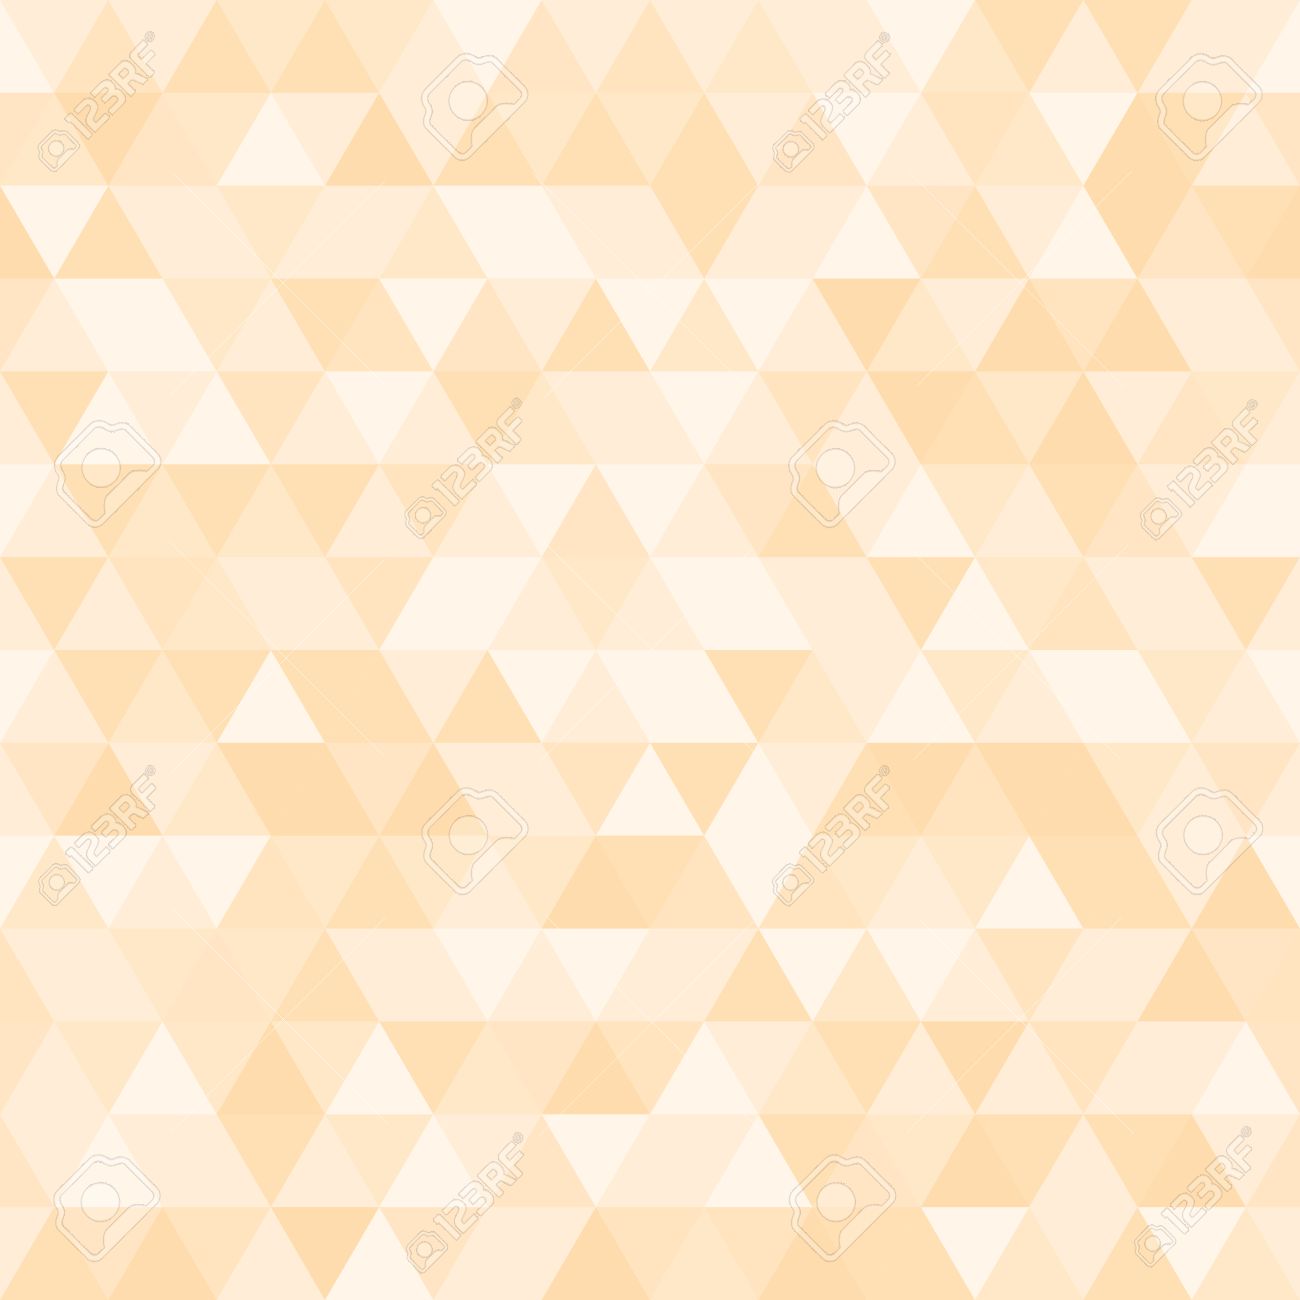 Geometric Vector Texture With Light Orange And Pink Triangles